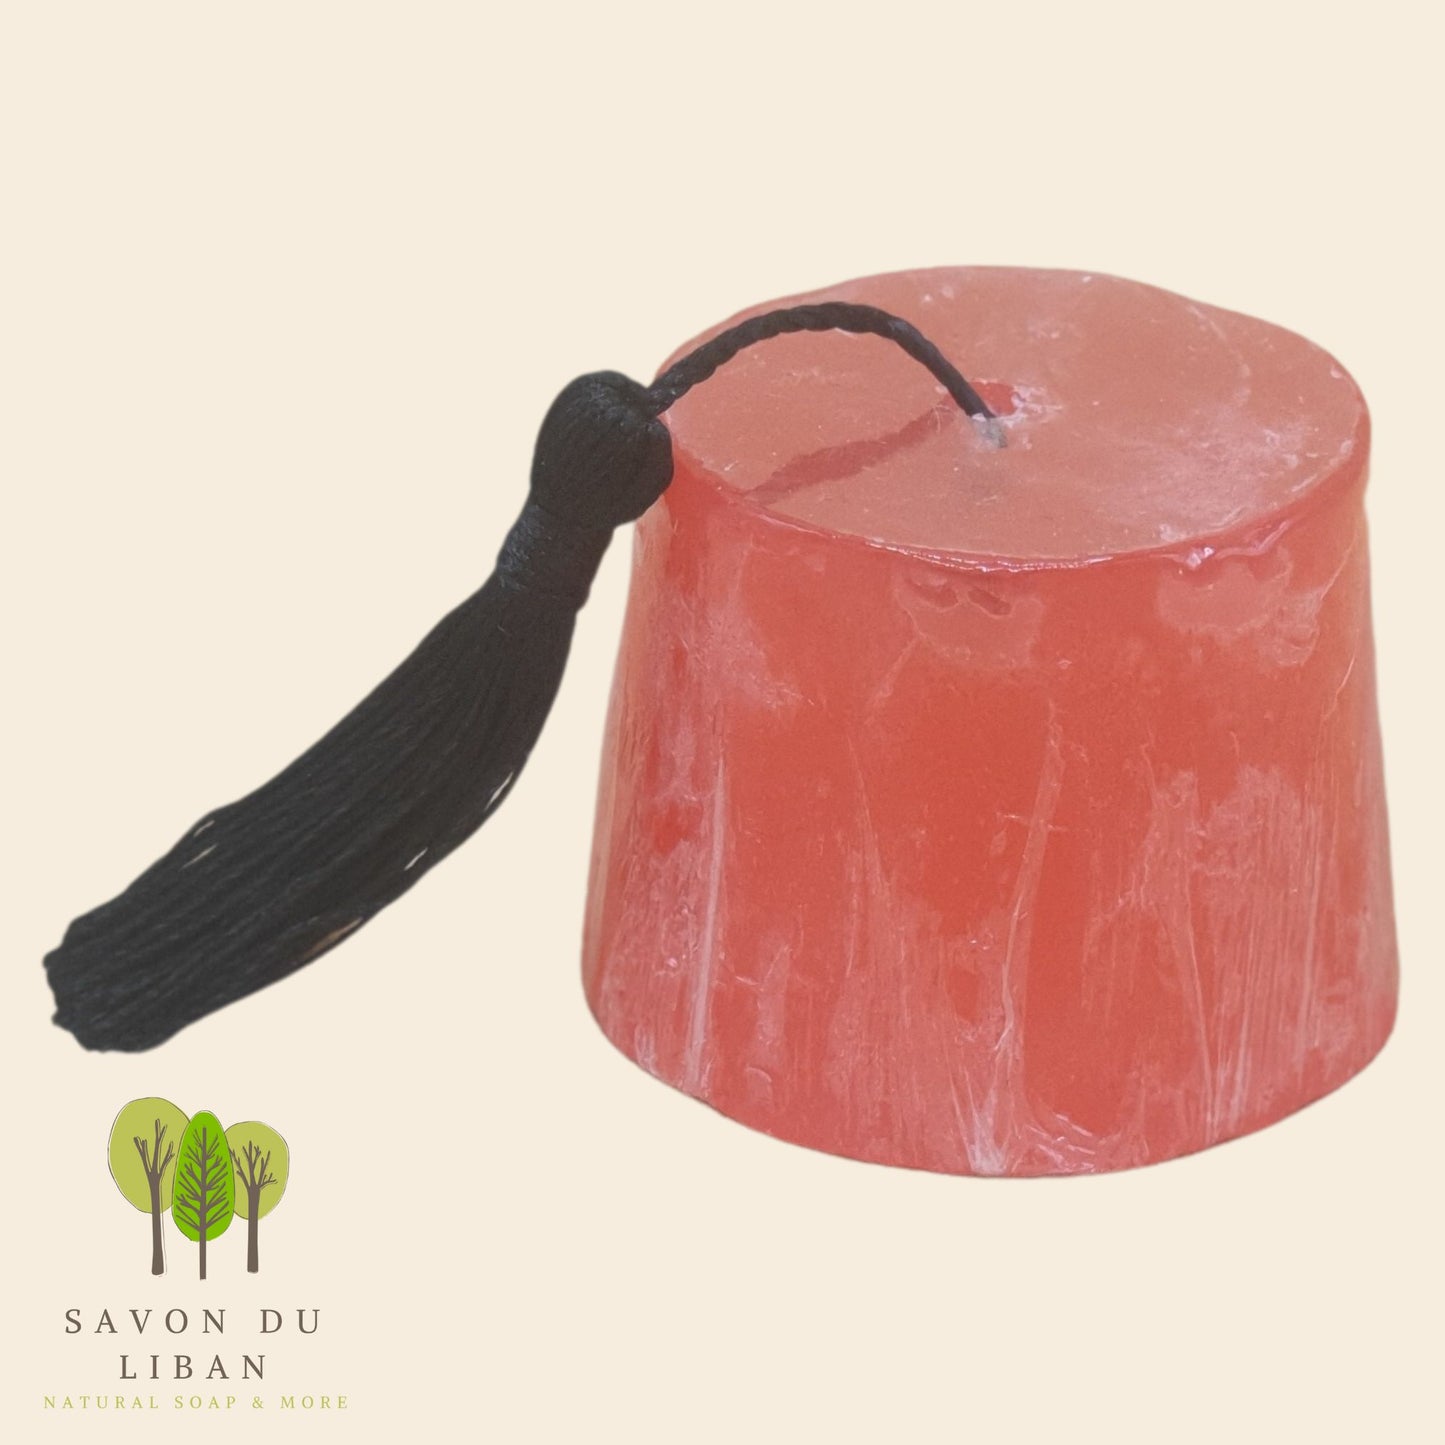 The Good Old Tarboosh - The Traditional Lebanese Hat Handmade from Soap!